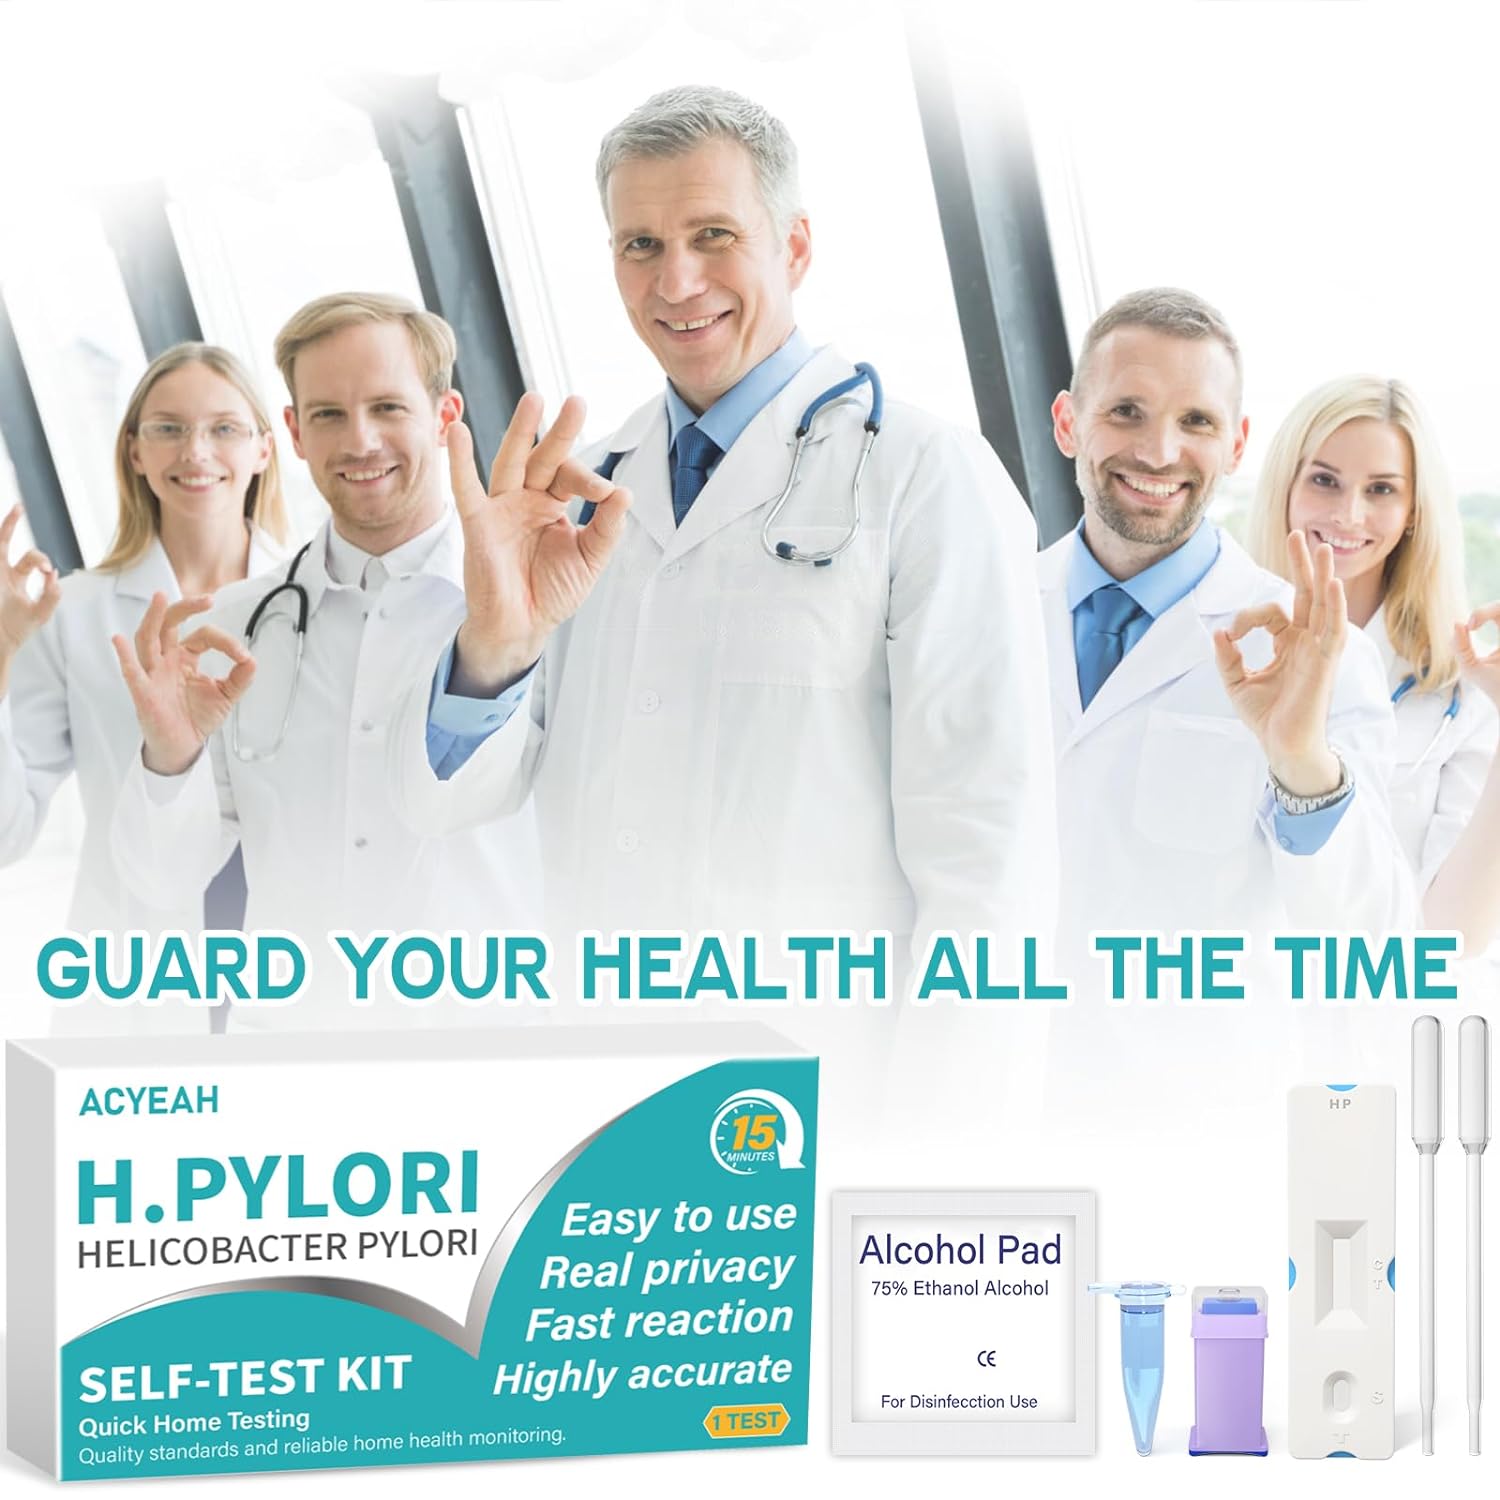 ACYEAH H Pylori Test Kit, H. Pylori Self Test Kit, Helicobacter Pylori Test Kits At Home, H-pylori Test Kit, Fast and Highly Accurate